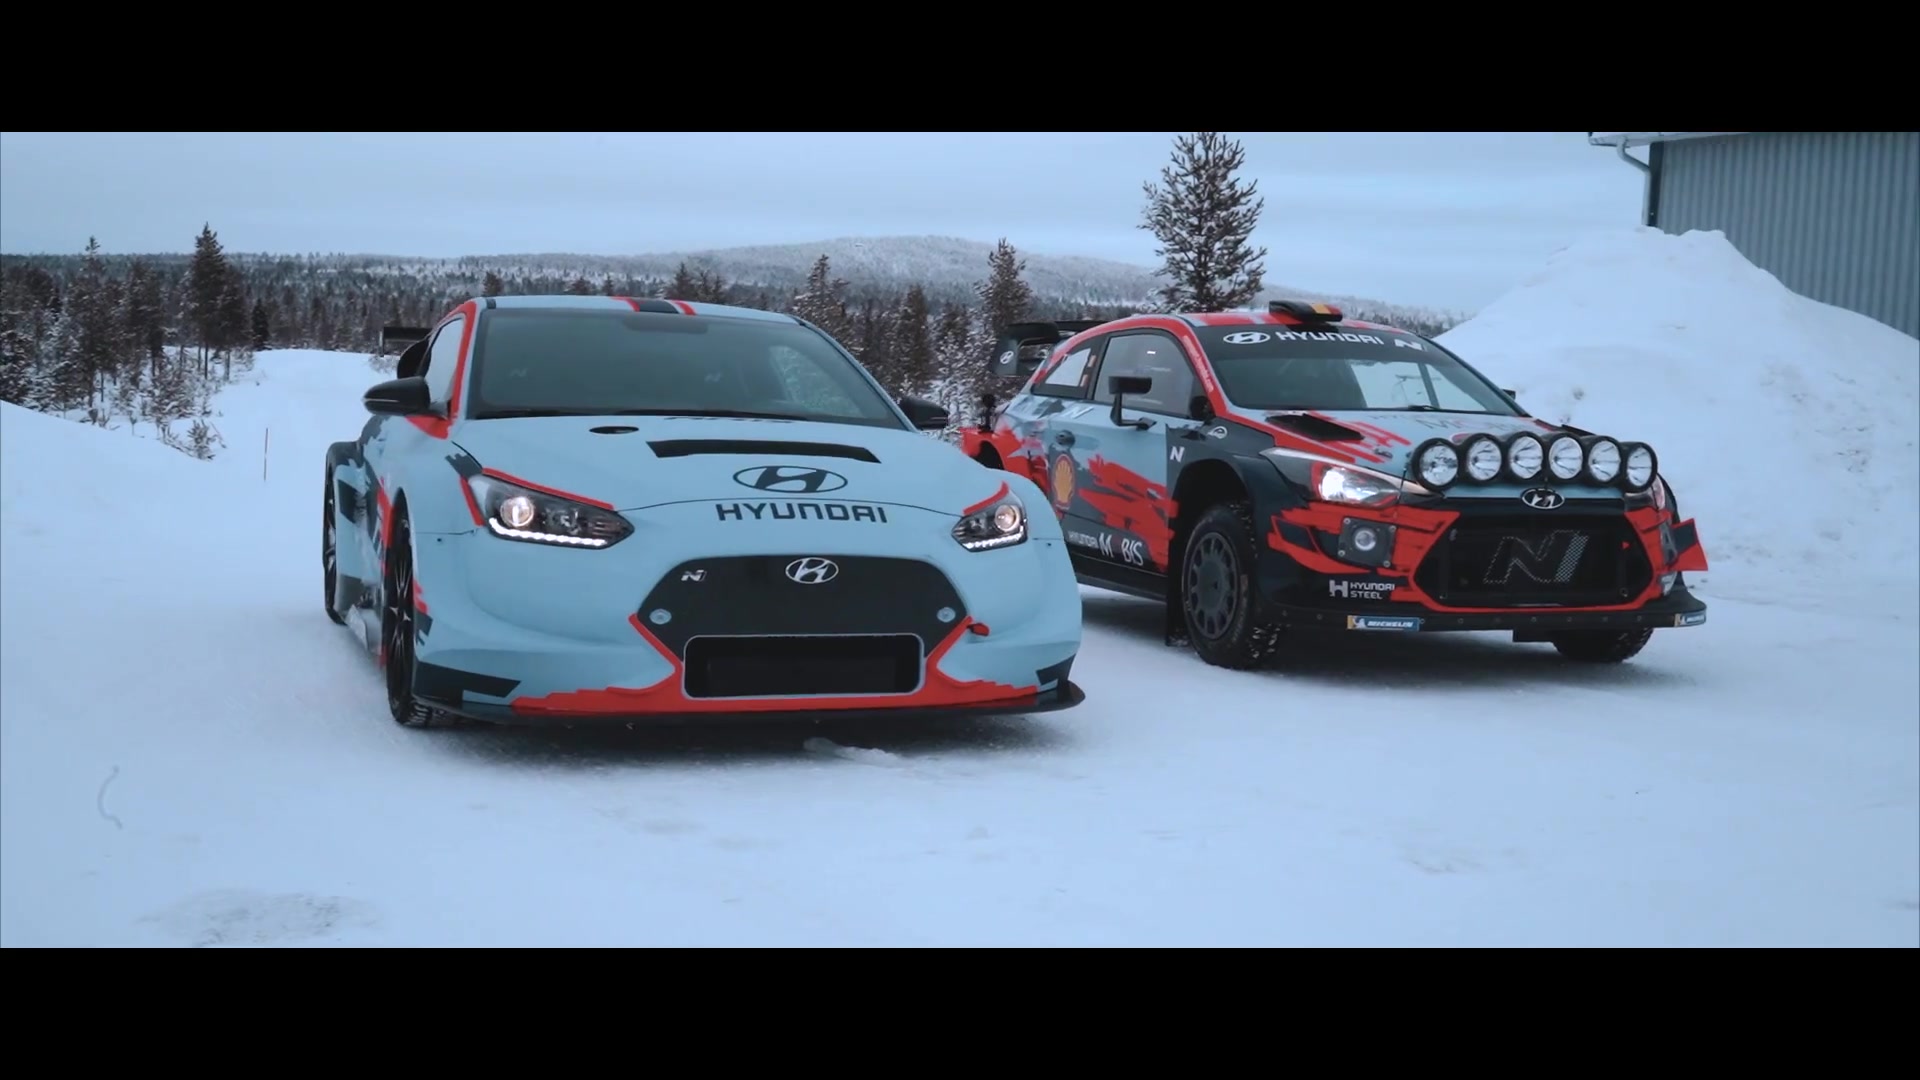 Hyundai i20 N – First images of the prototype during winter tests